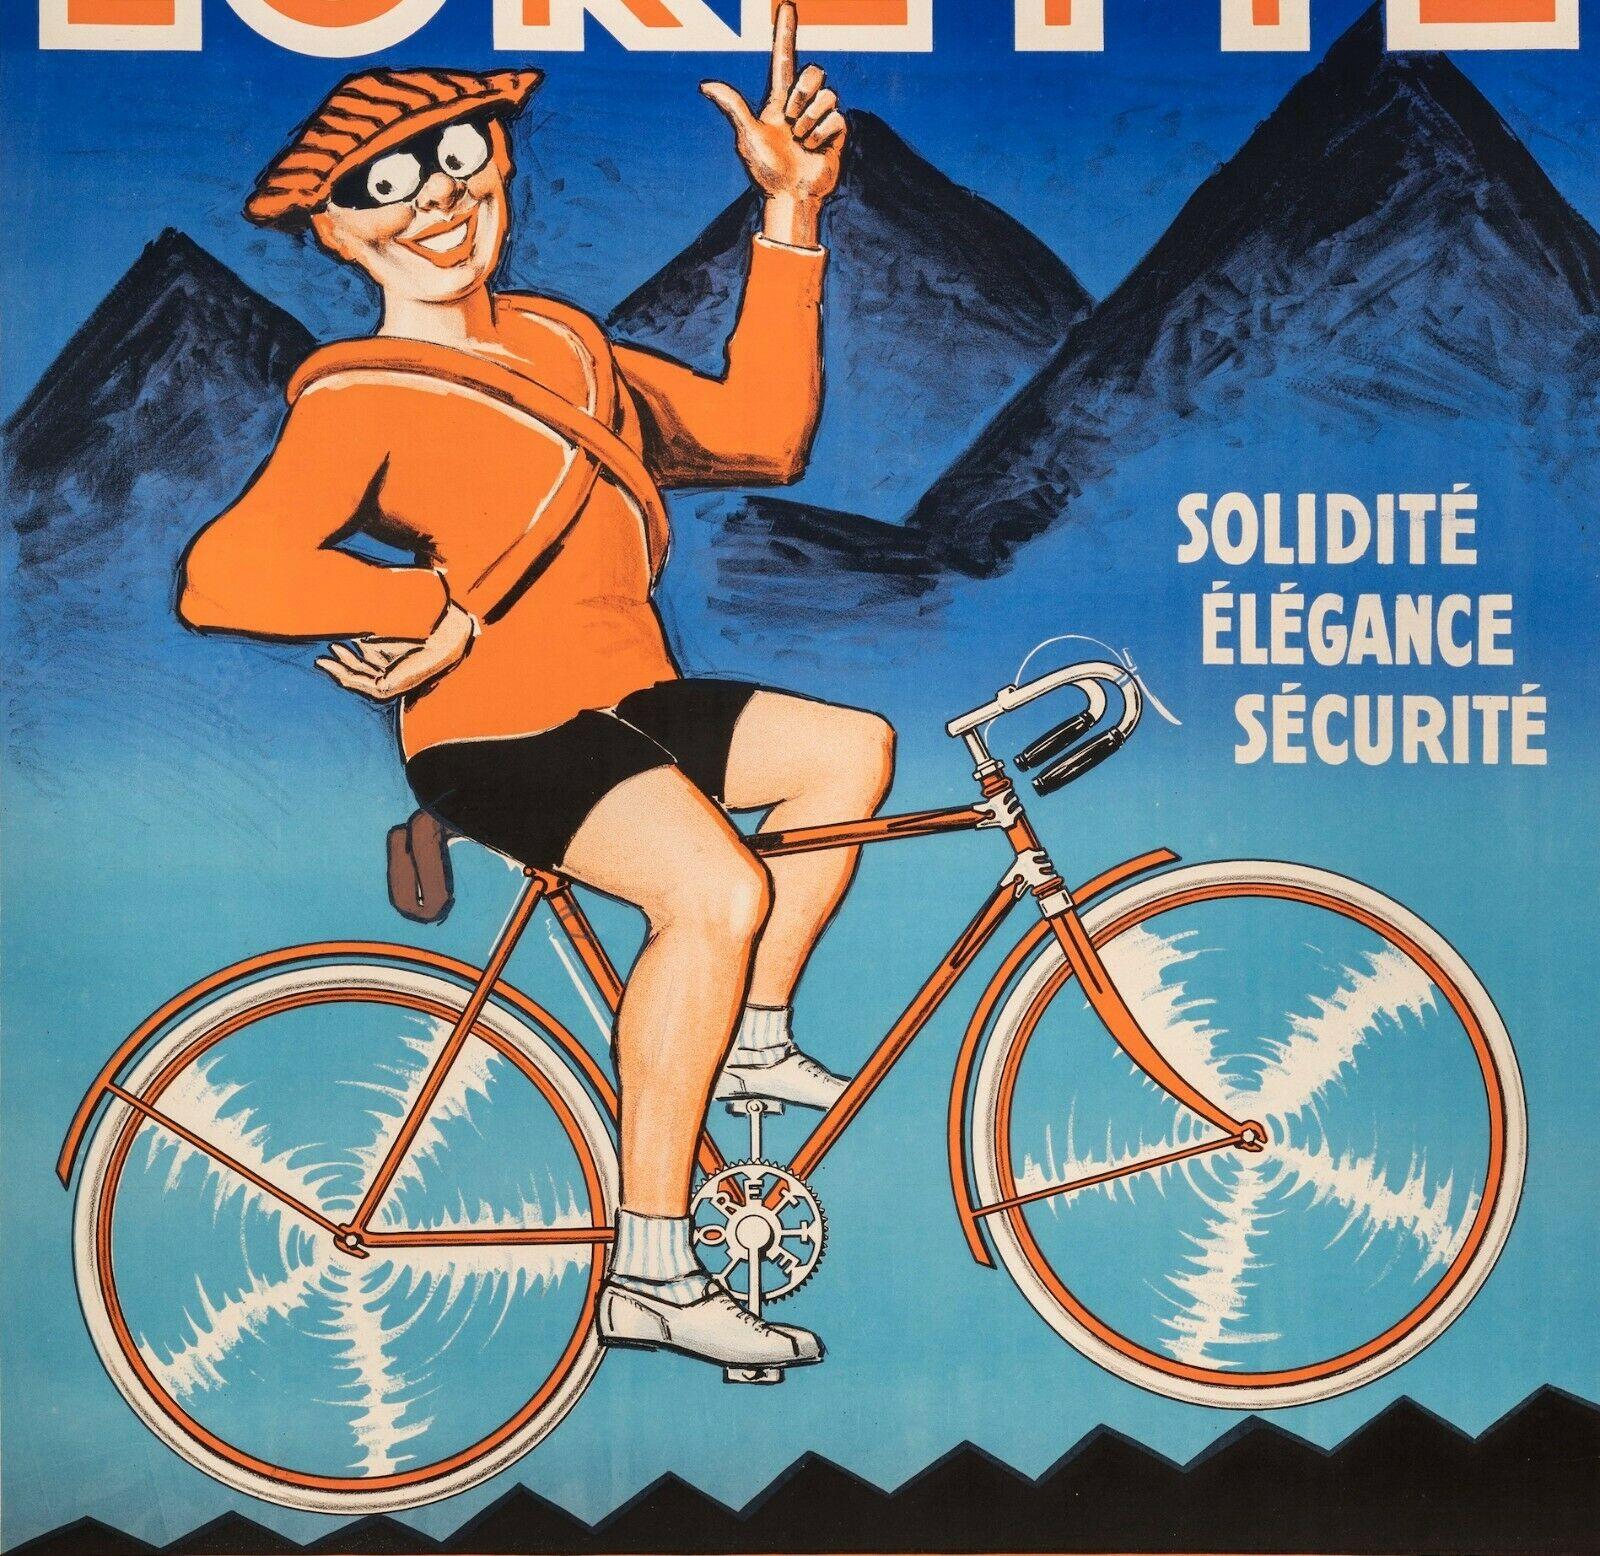 Original Poster-Cycles Lorette-Cycling-Mountain Bicycle, c.1925

Advertising poster for Lorette Cycles. 
A cyclist, in orange clothes, is we a bicycle and is riding towards the mountain, visible in the background.

Additional Details:
Materials and